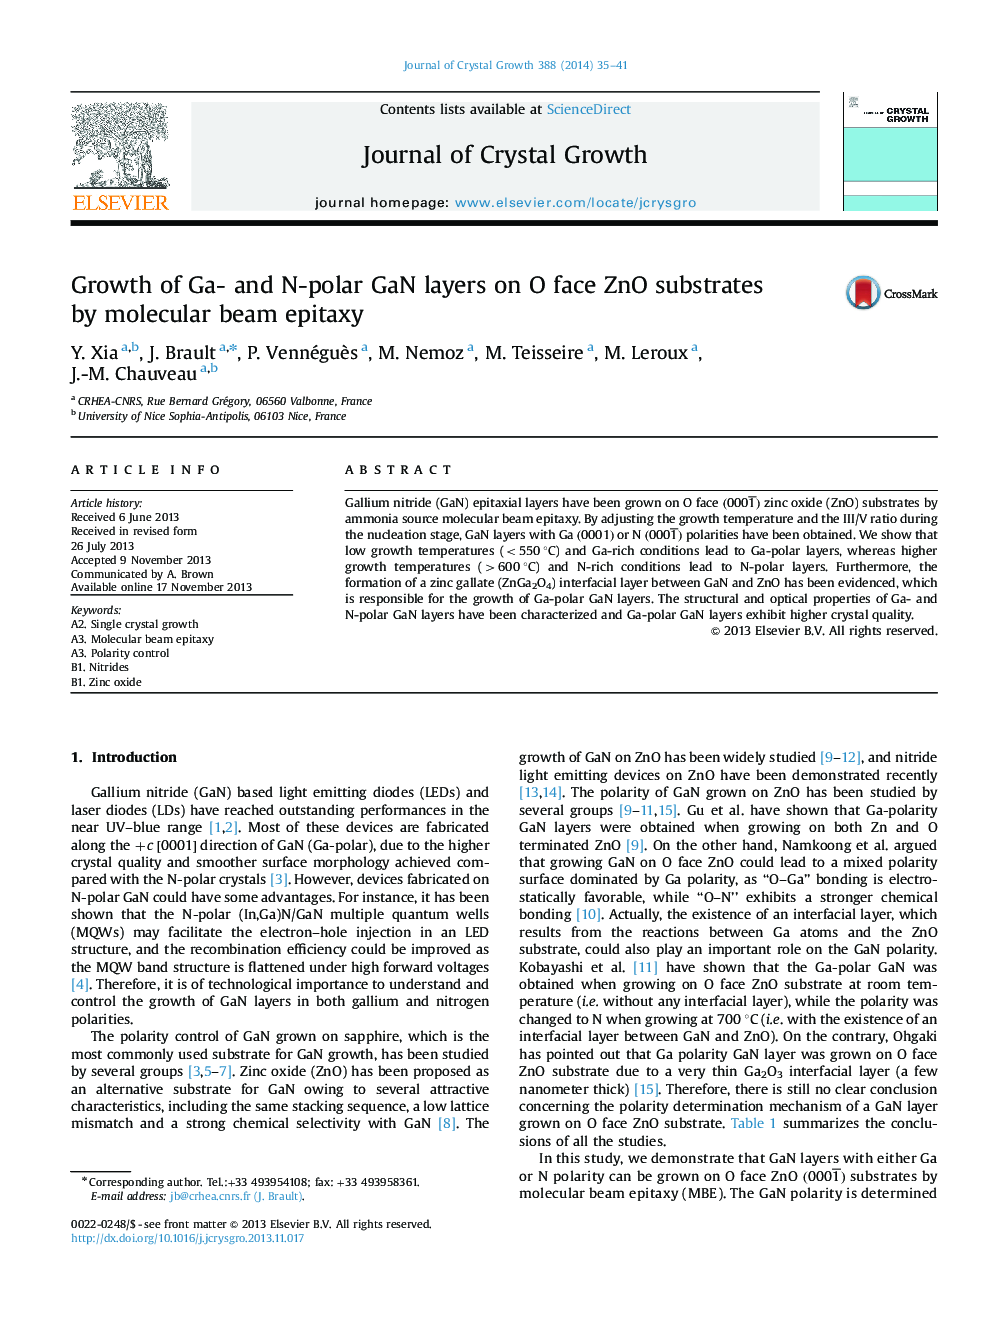 Growth of Ga- and N-polar GaN layers on O face ZnO substrates by molecular beam epitaxy